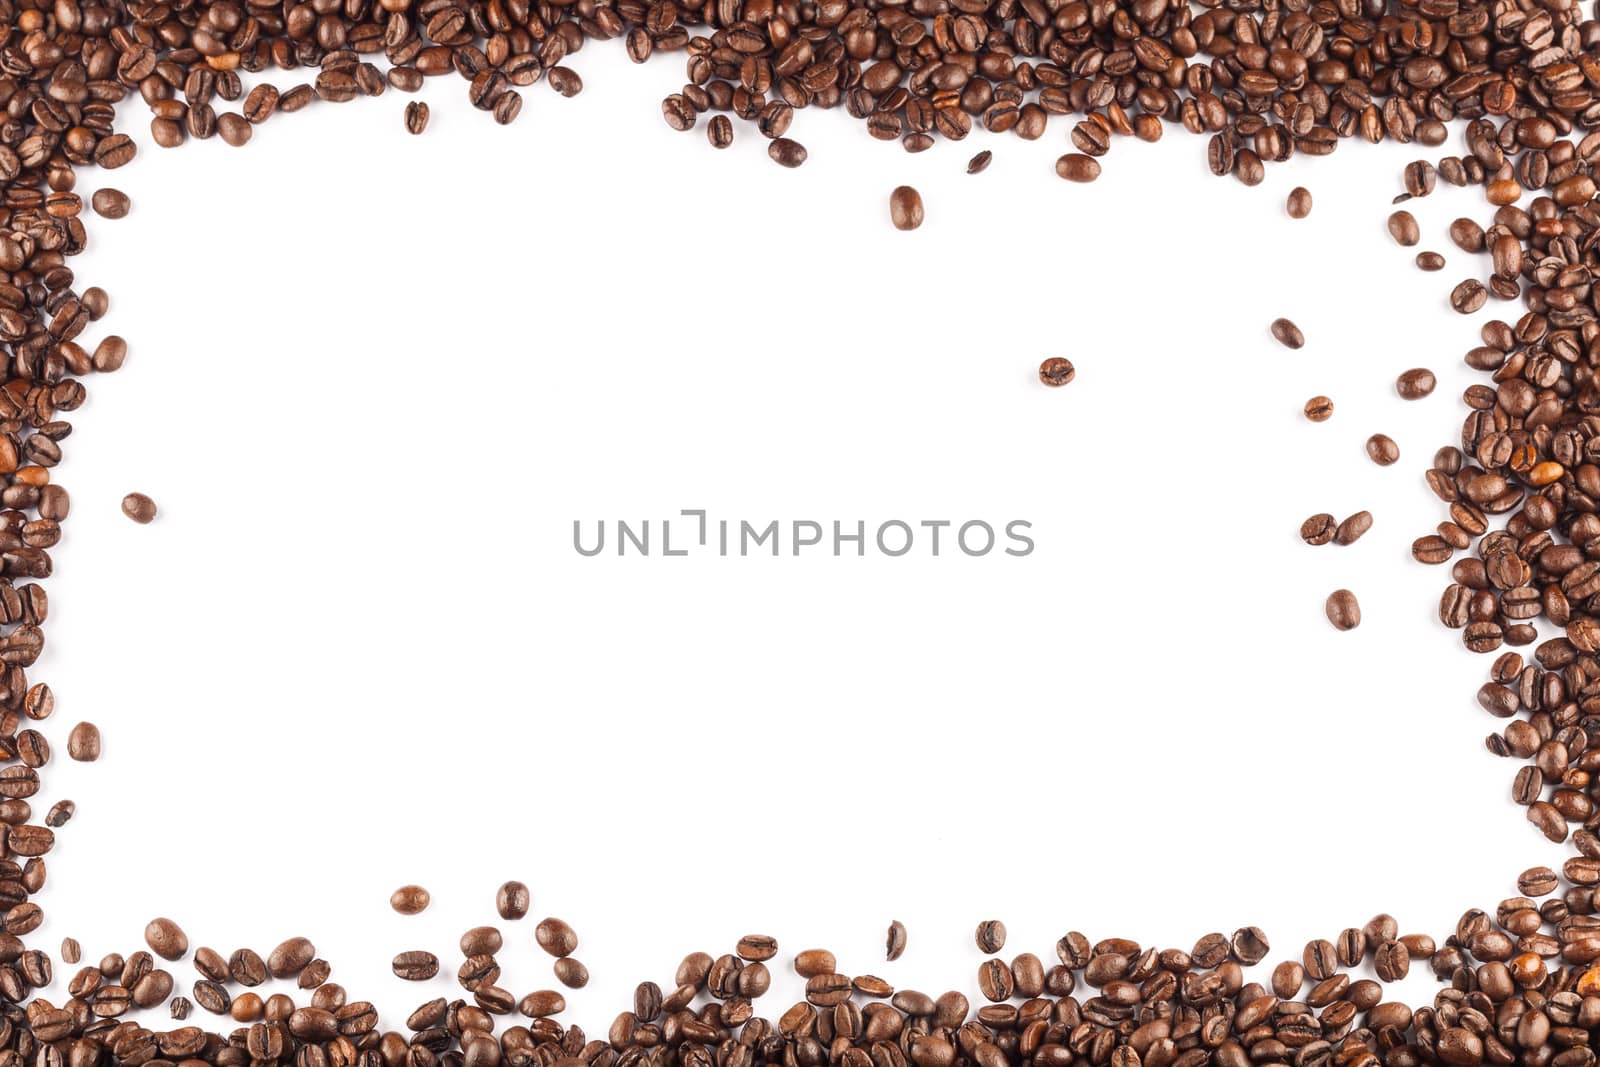 Coffee beans framing the image, on white.